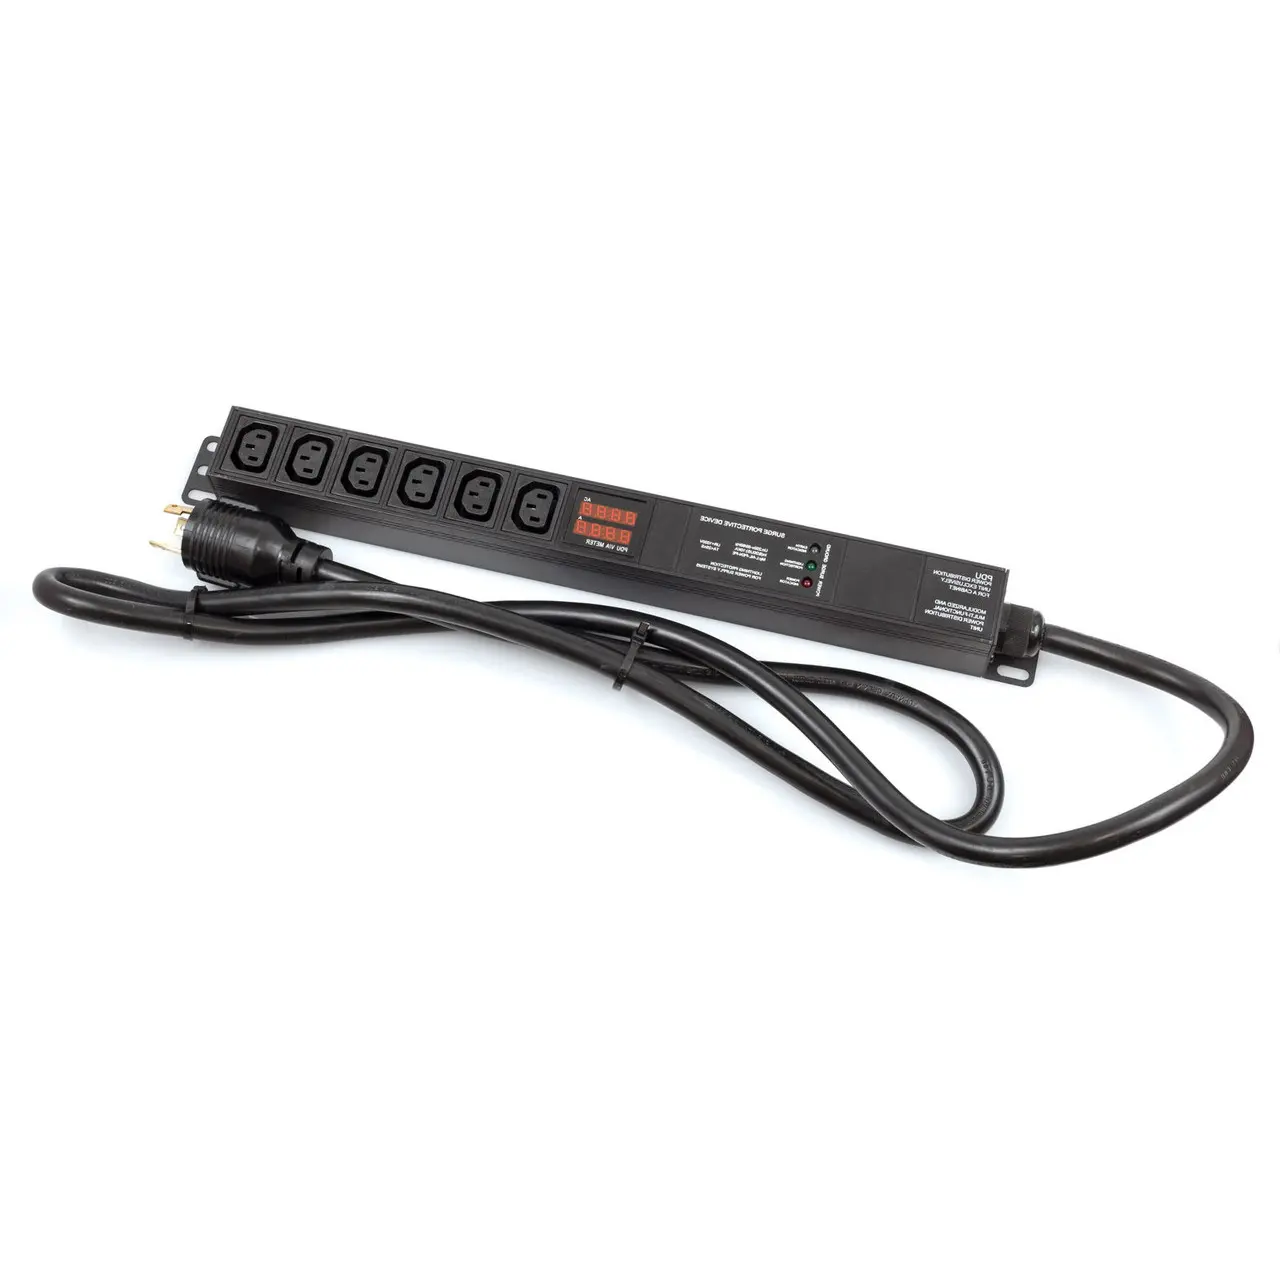 OEM Meter SPD Function With L6-30p Plug C13 30A 240V PDU Bitcoin PDU Mining S9 Antminer Rack